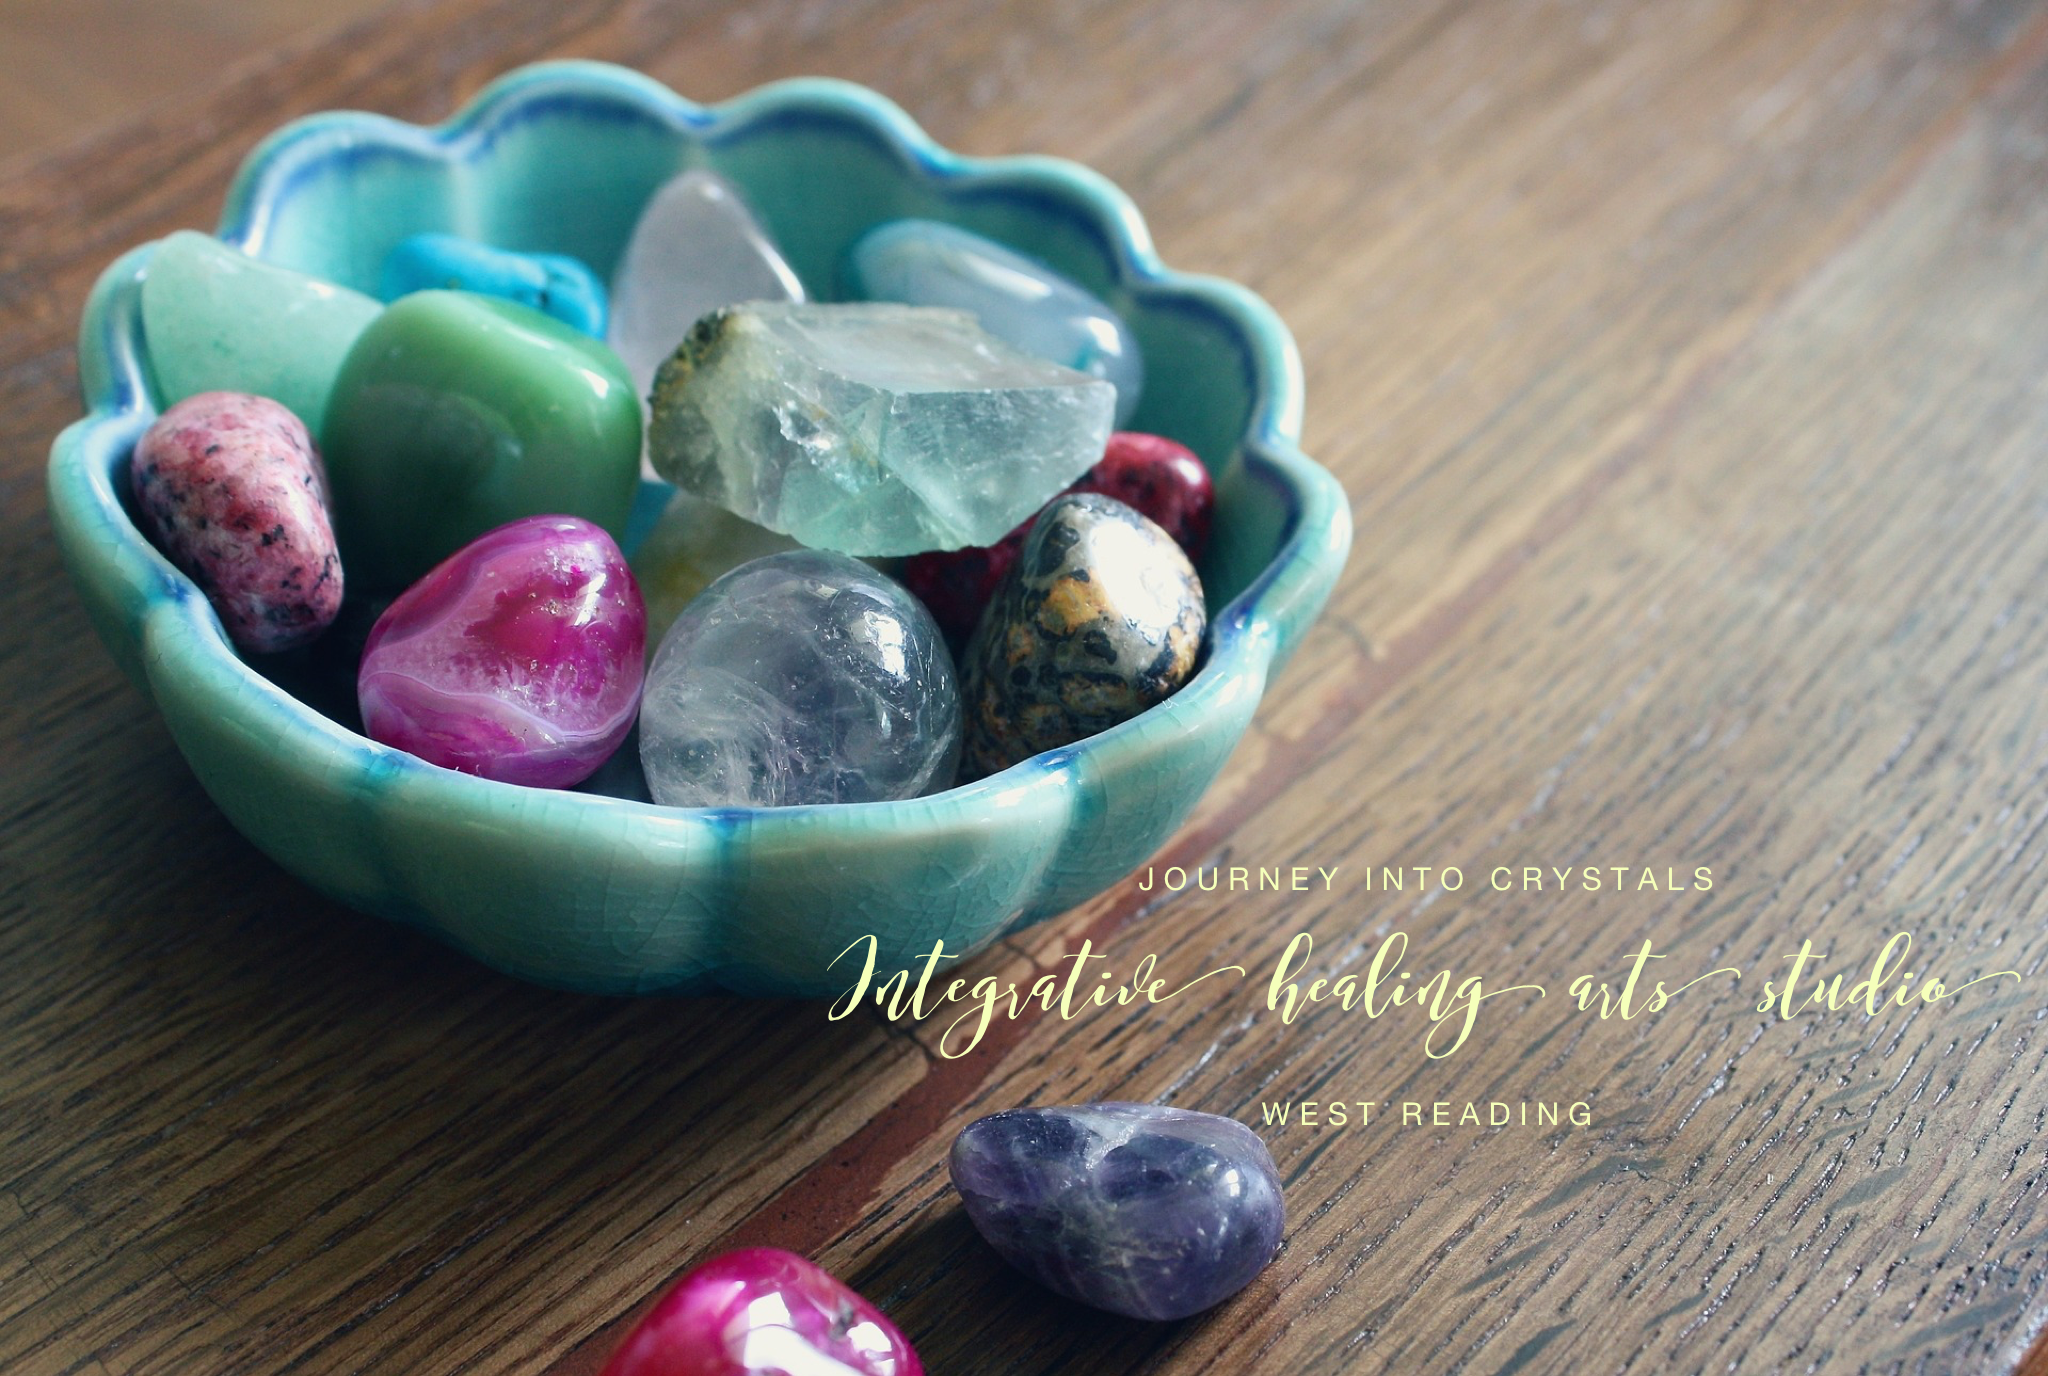 Crystal Therapy at the Integrative Healing Arts Studio, West Reading